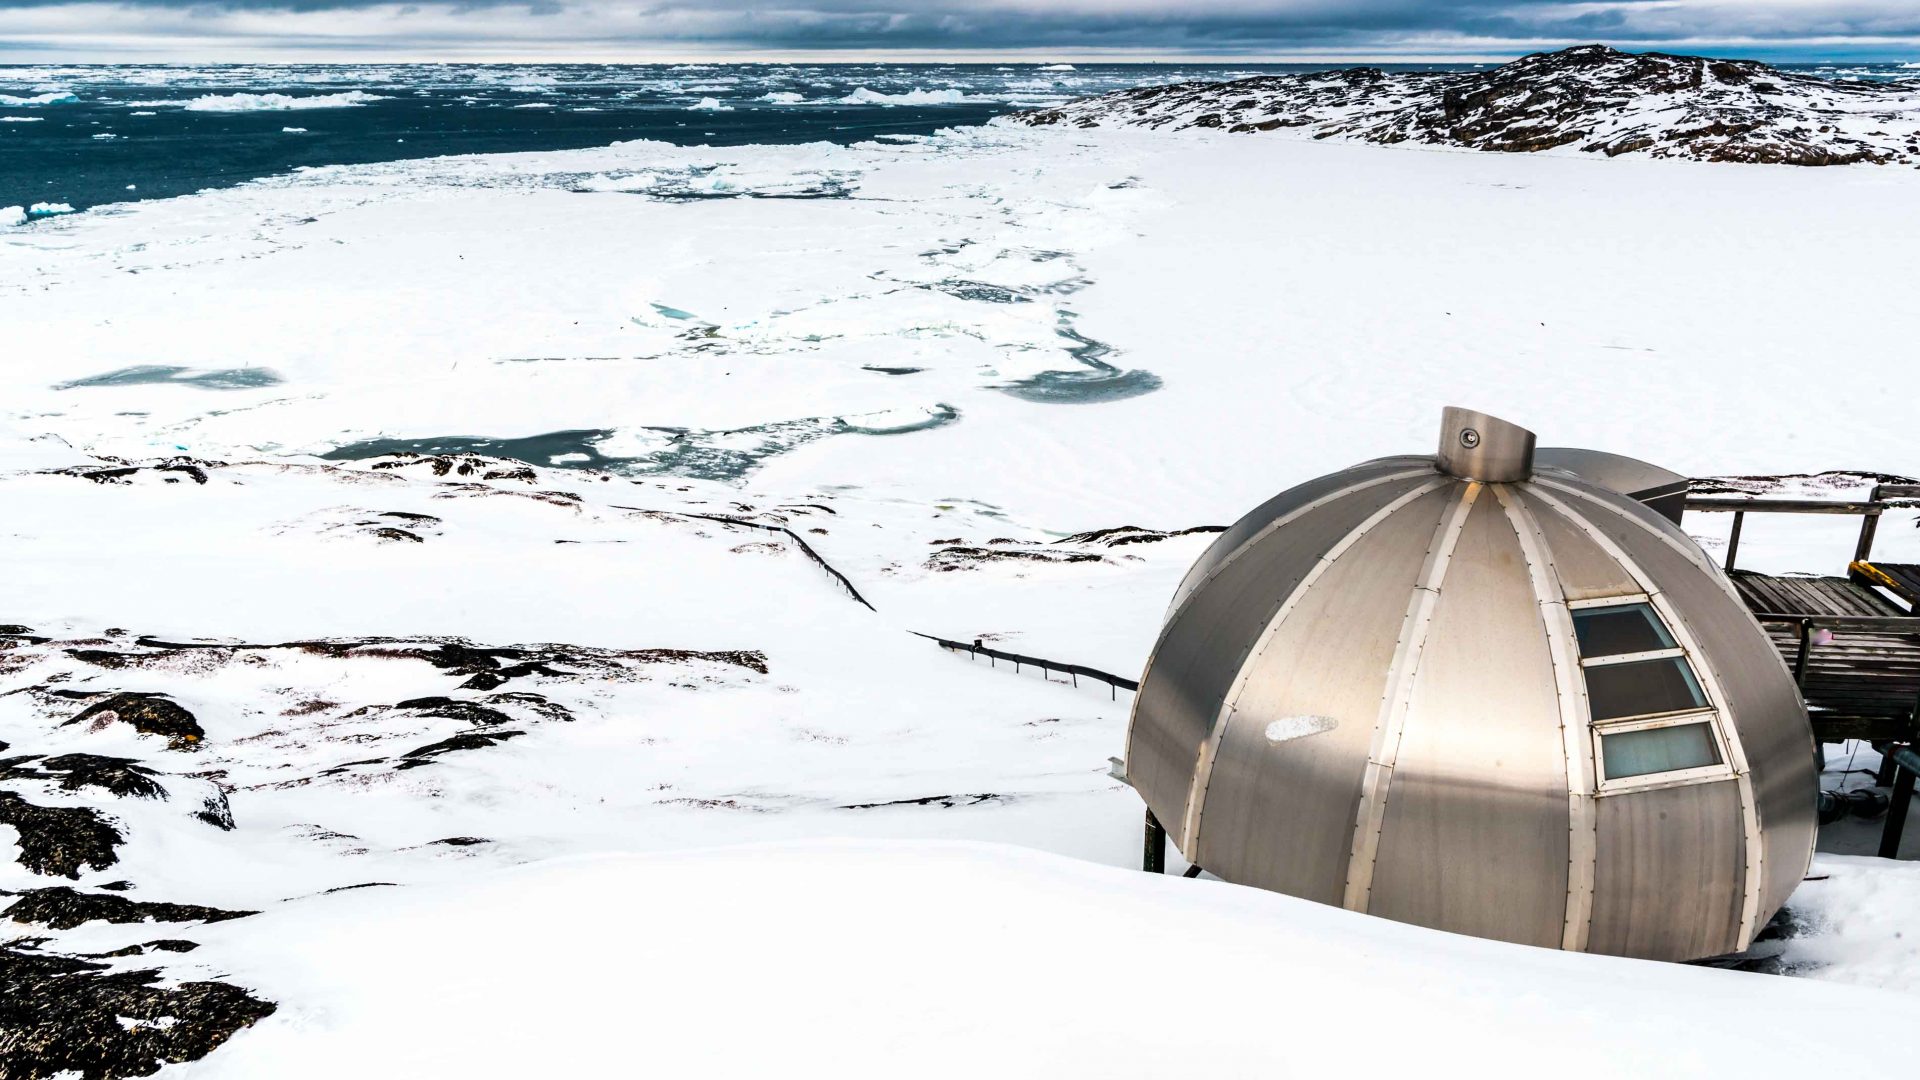 Metal igloos can be viewed from the observation deck of the Hotel Arctic in Ilulissat, Greenland..